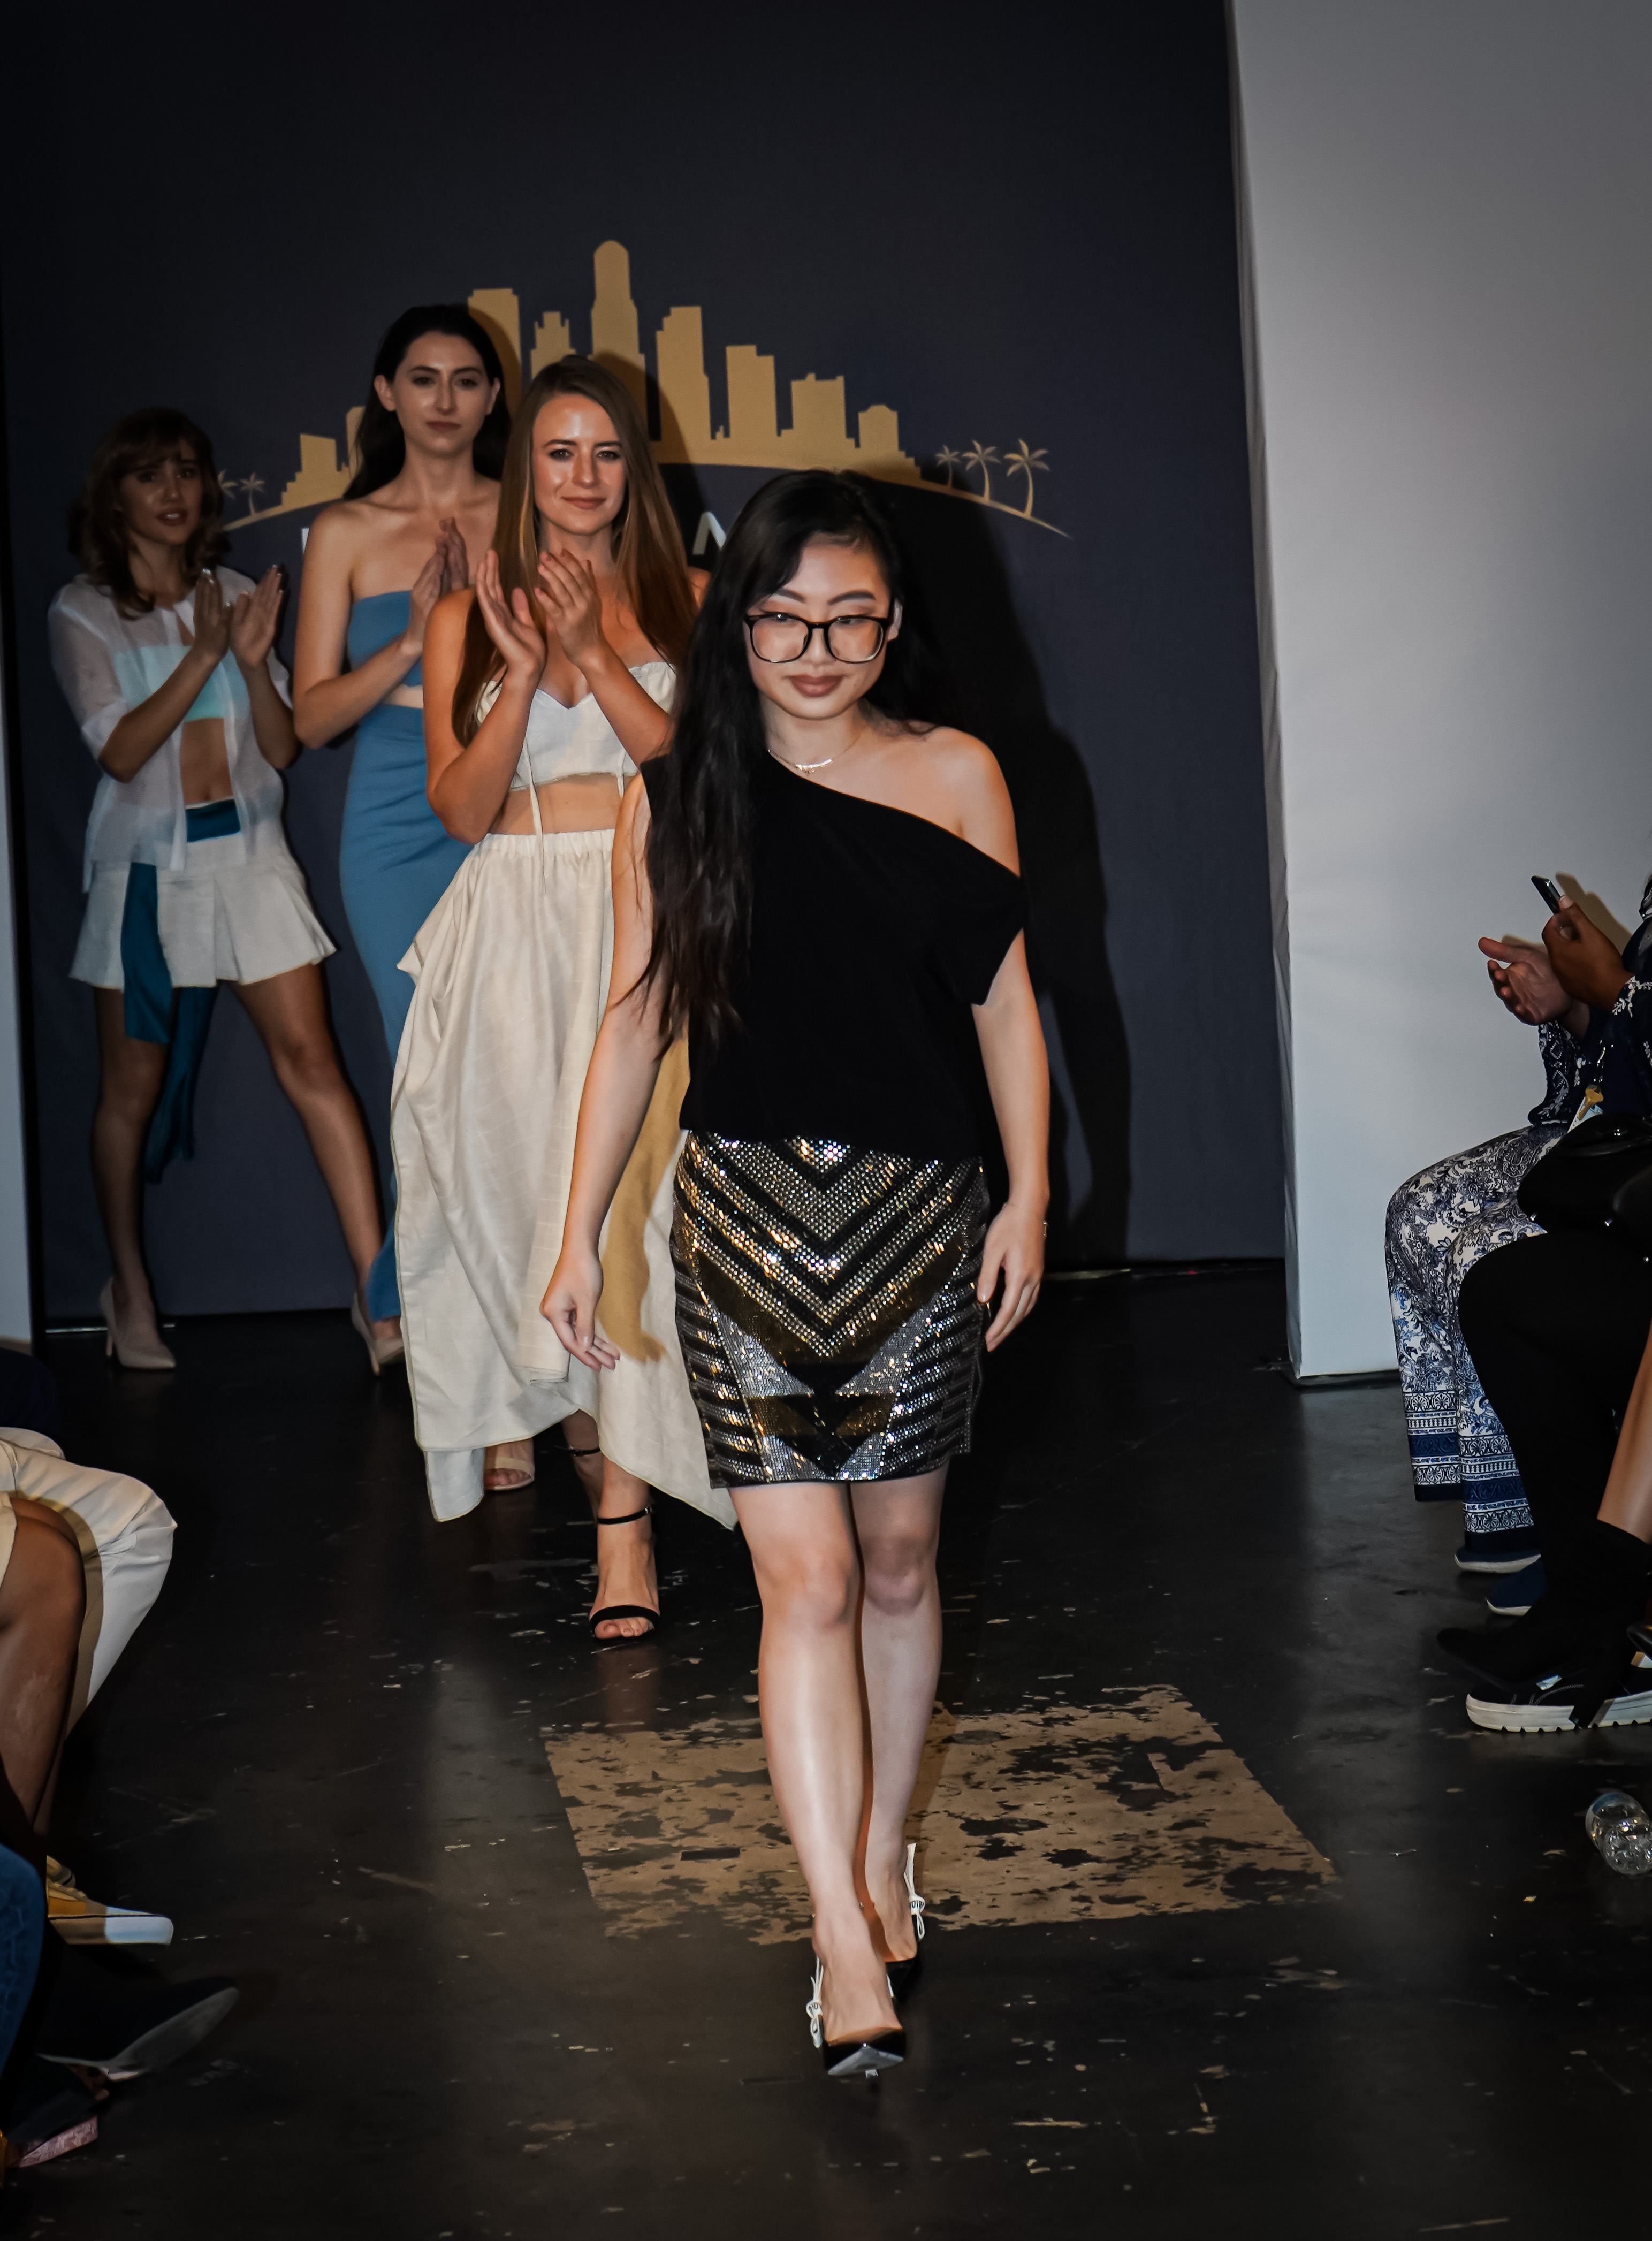 FIDM Student Celeste Tran on the runway with models wearing her fashion designs